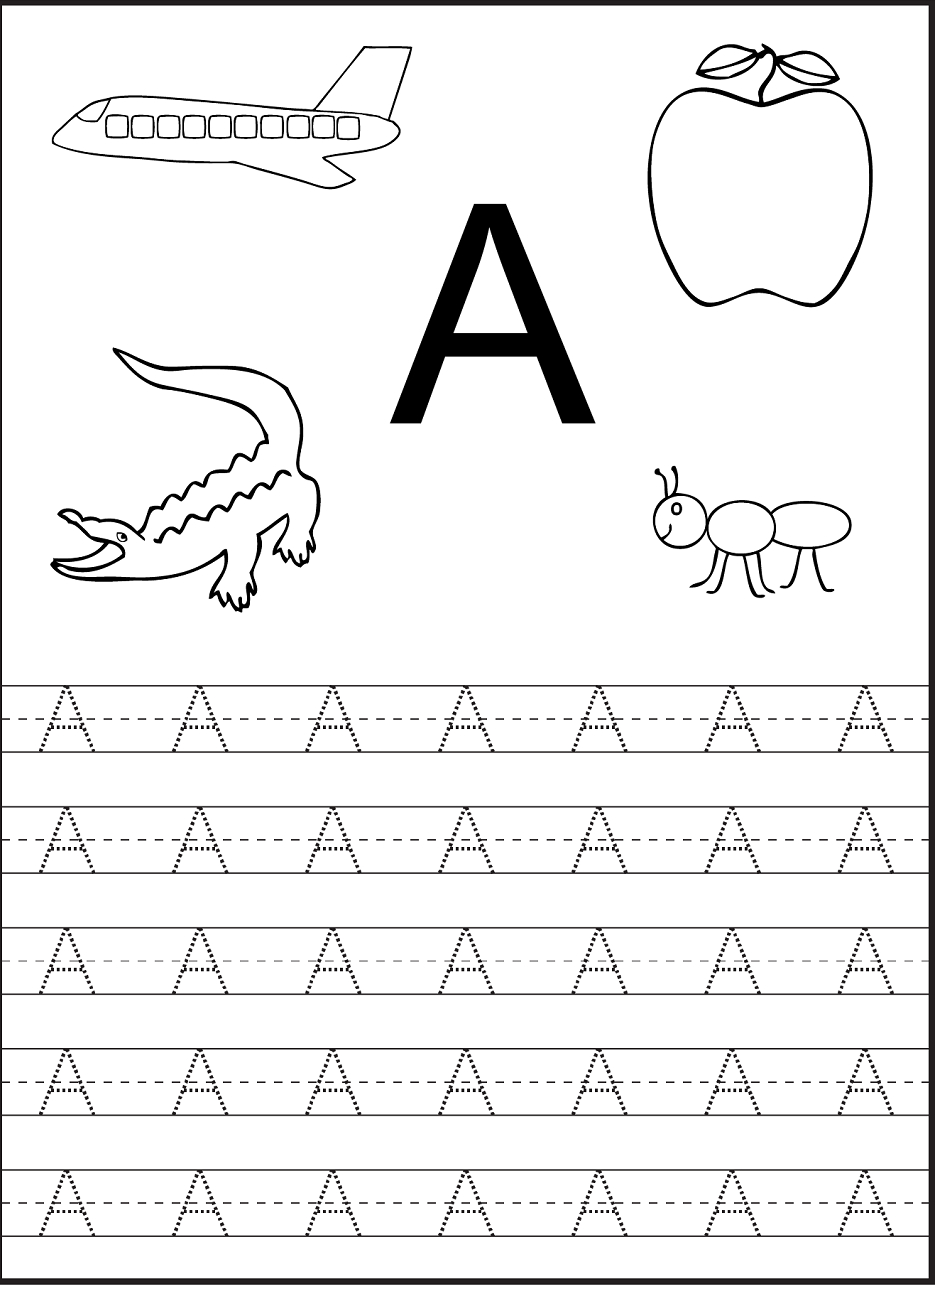 Tracing The Letter A Free Printable | Preschool Worksheets throughout Printable Tracing Letters For Pre K